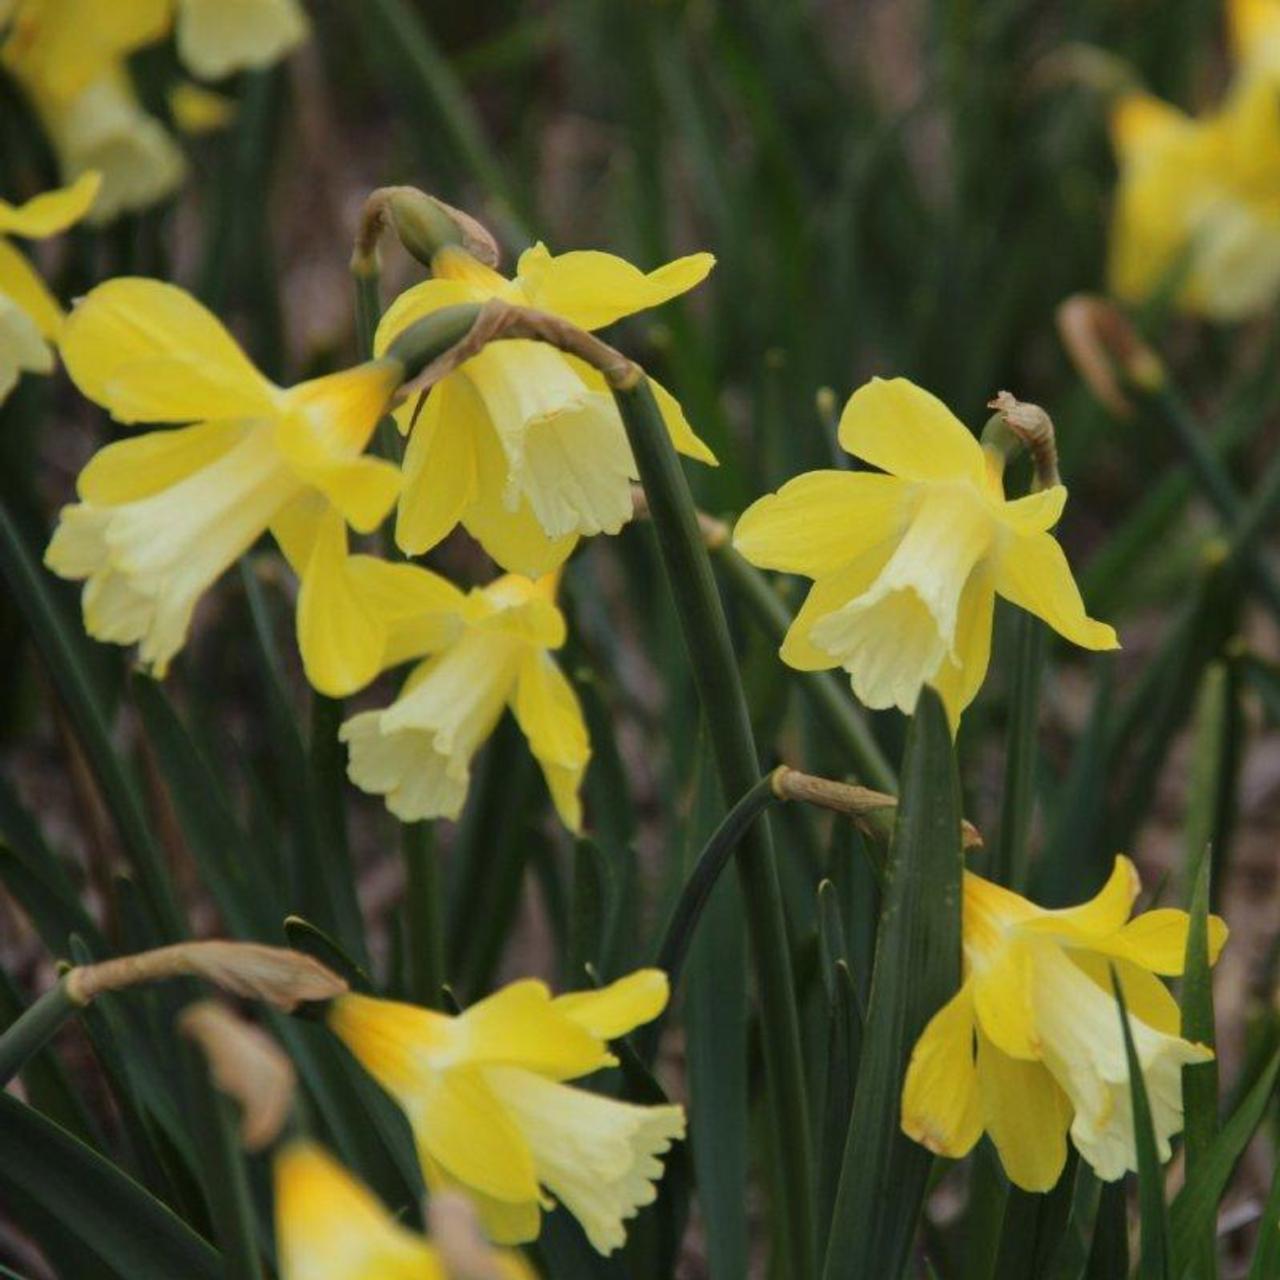 Narcissus 'Little Spell' plant